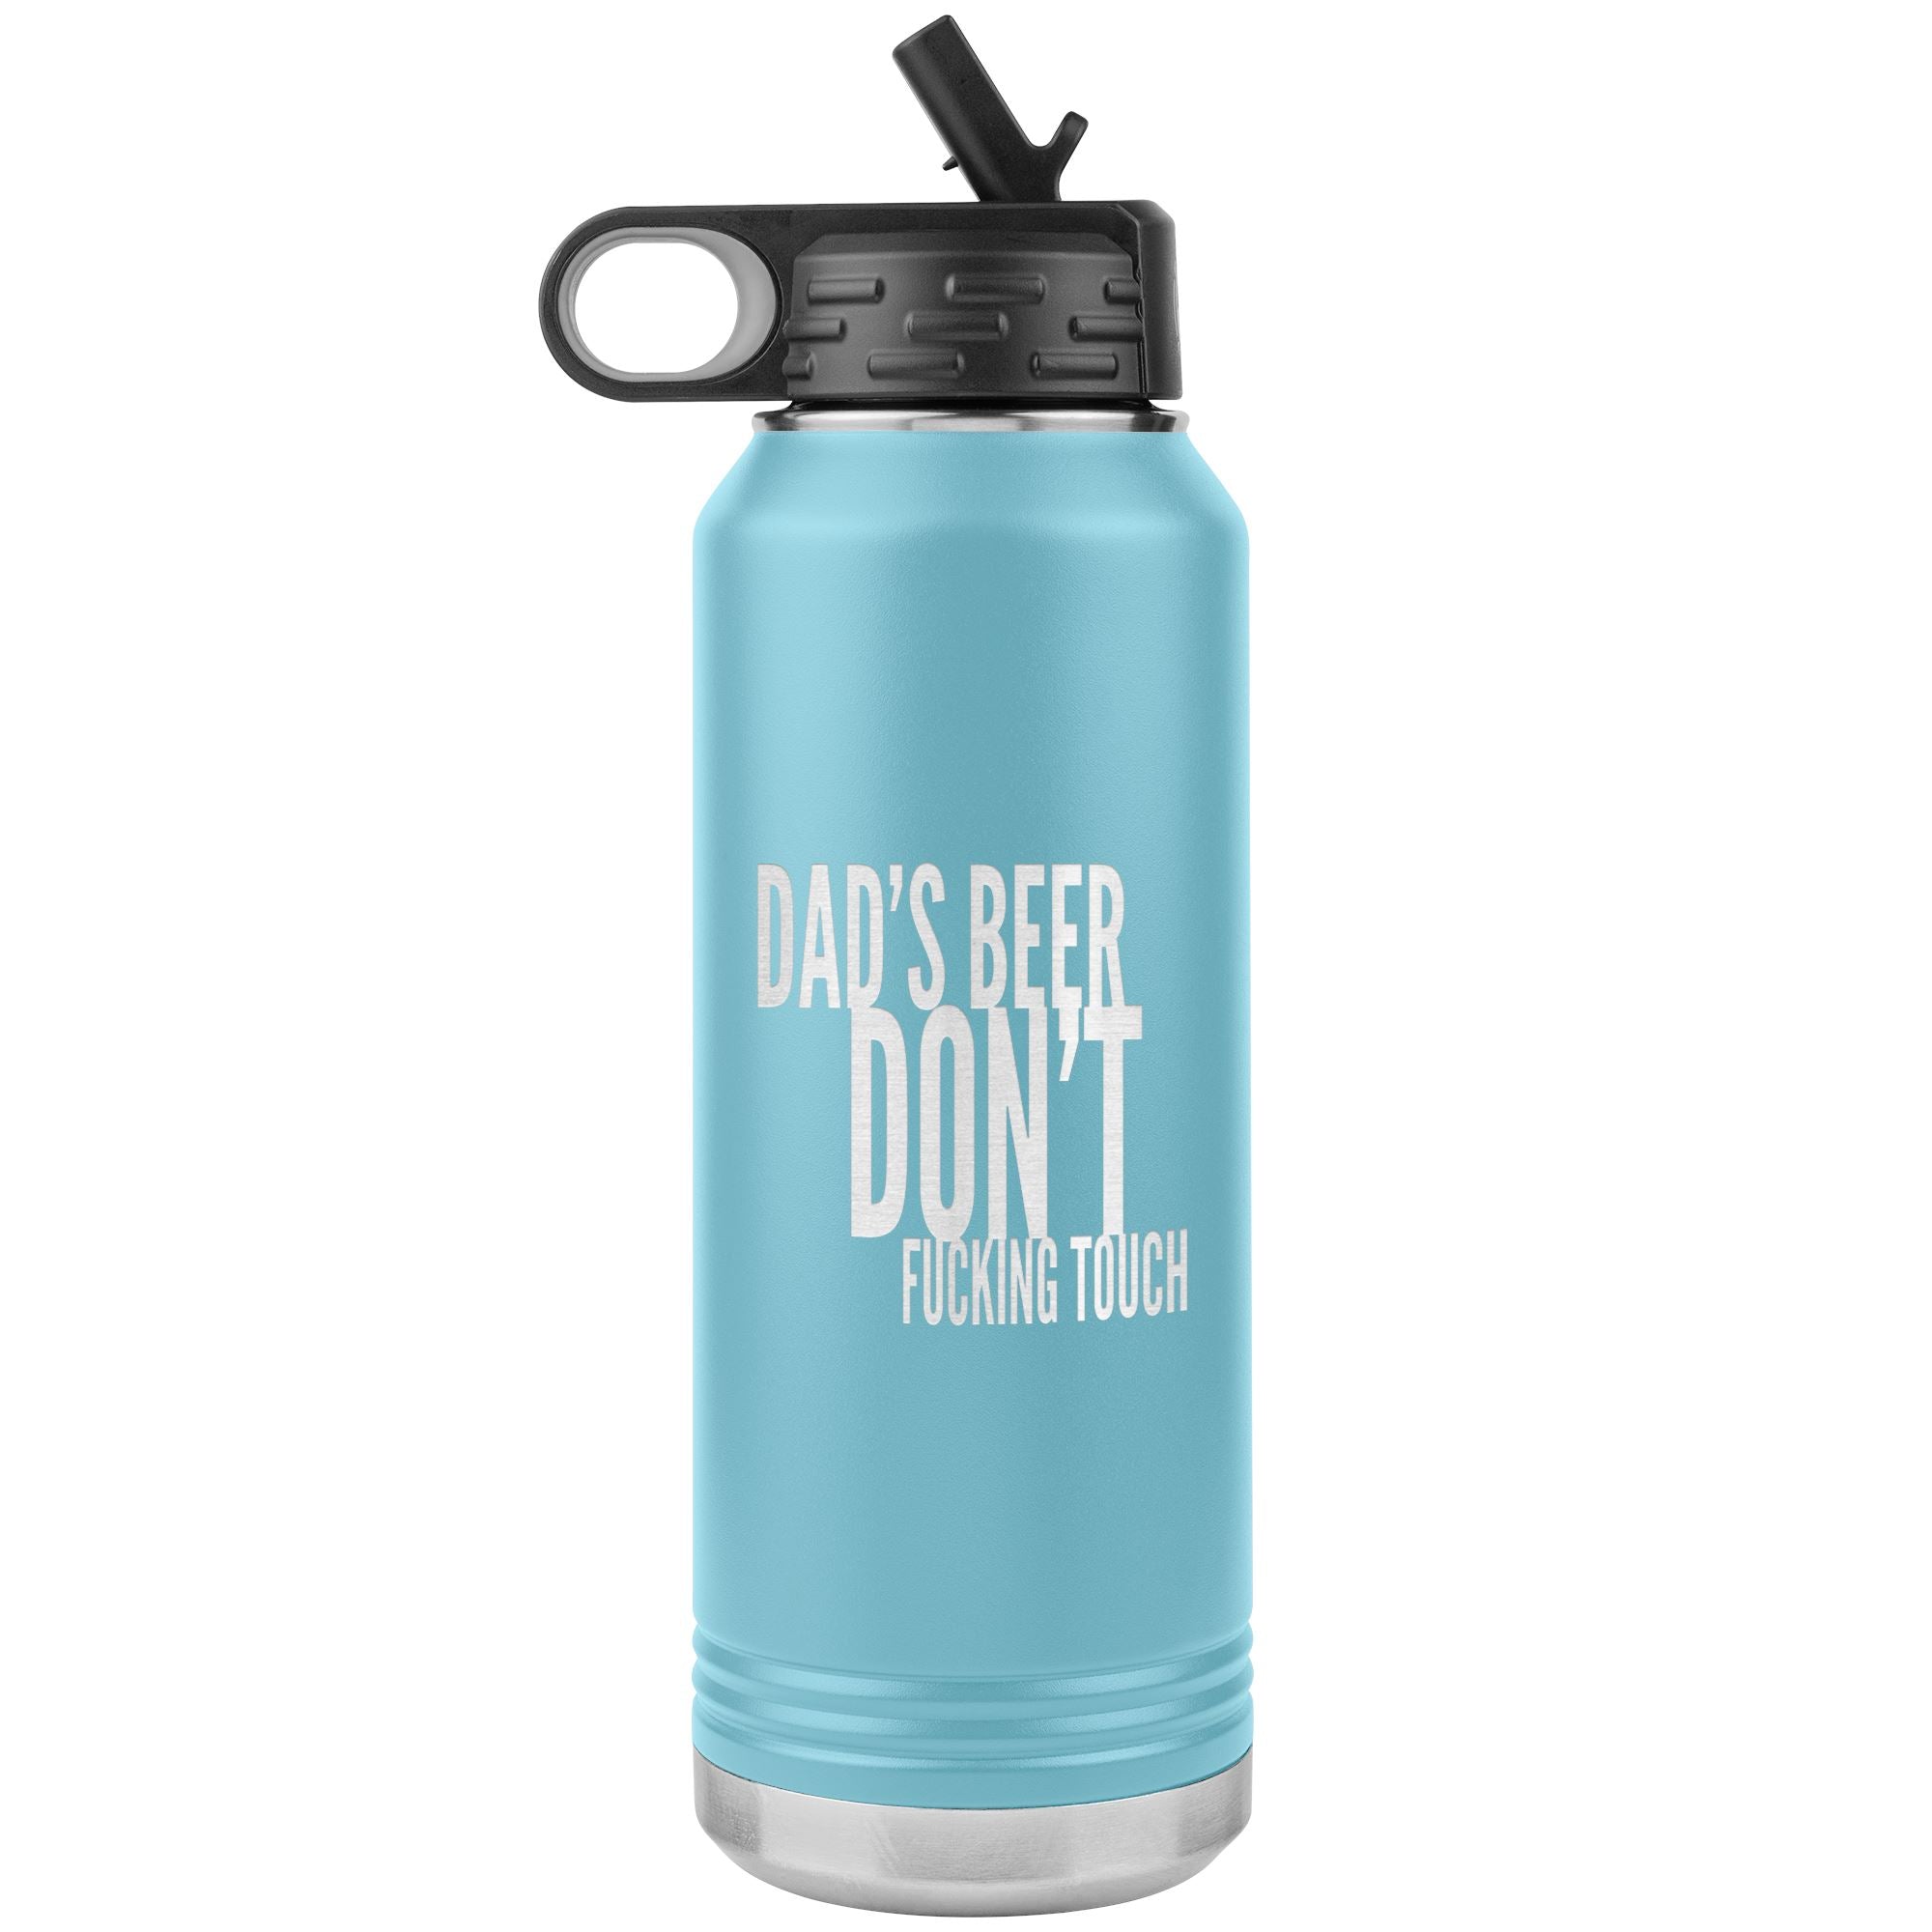 Dad's Beer Don't Fucking Touch 32oz Tumbler Tumblers Light Blue 